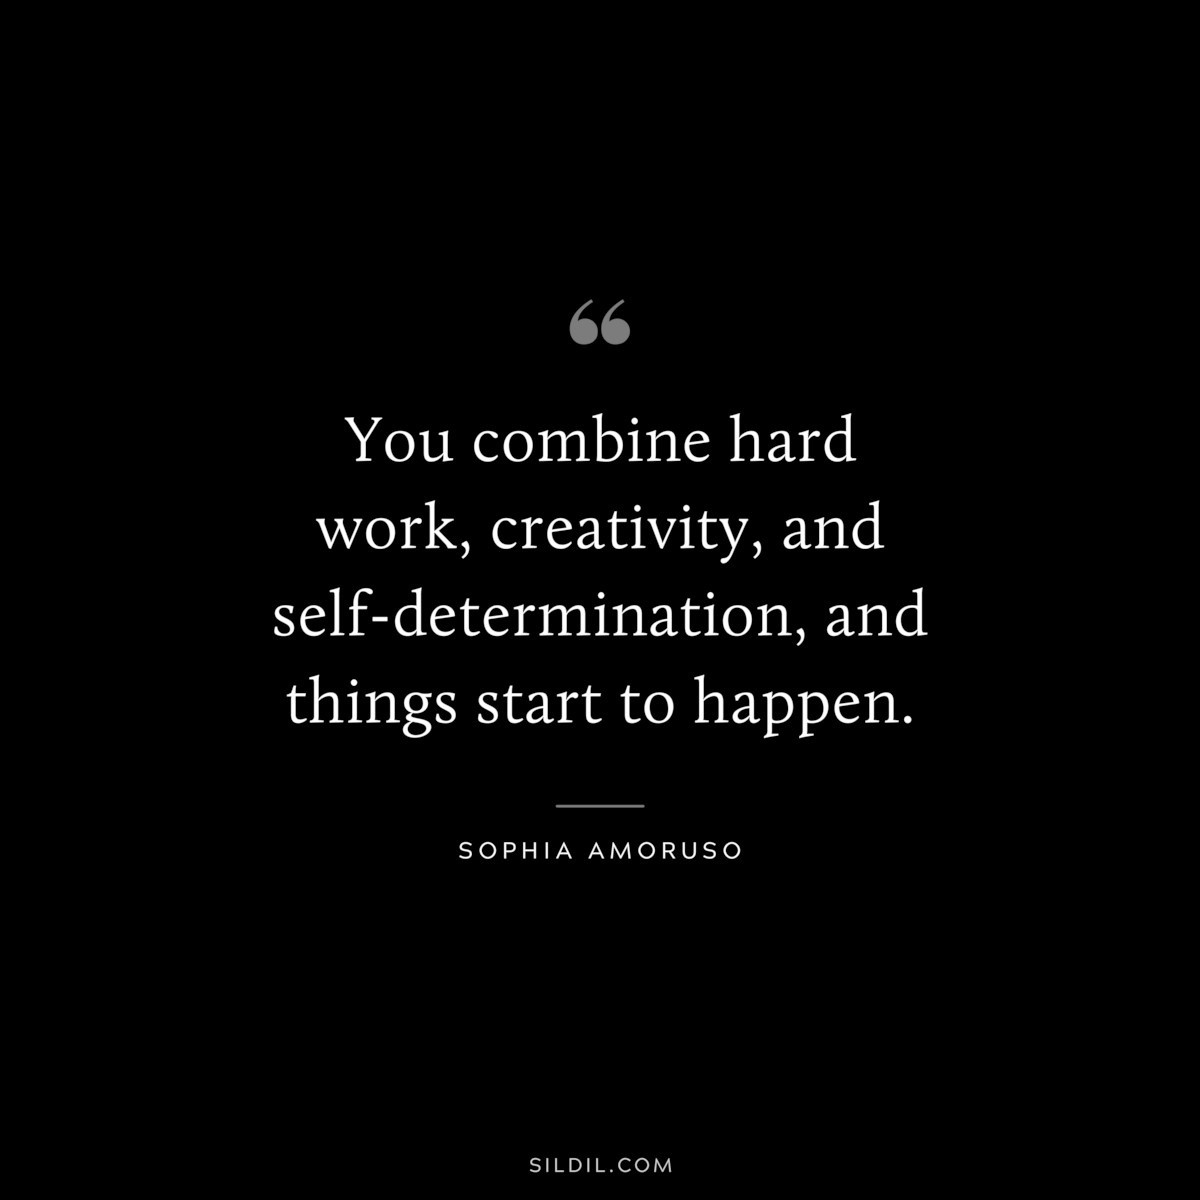 You combine hard work, creativity, and self-determination, and things start to happen. ― Sophia Amoruso